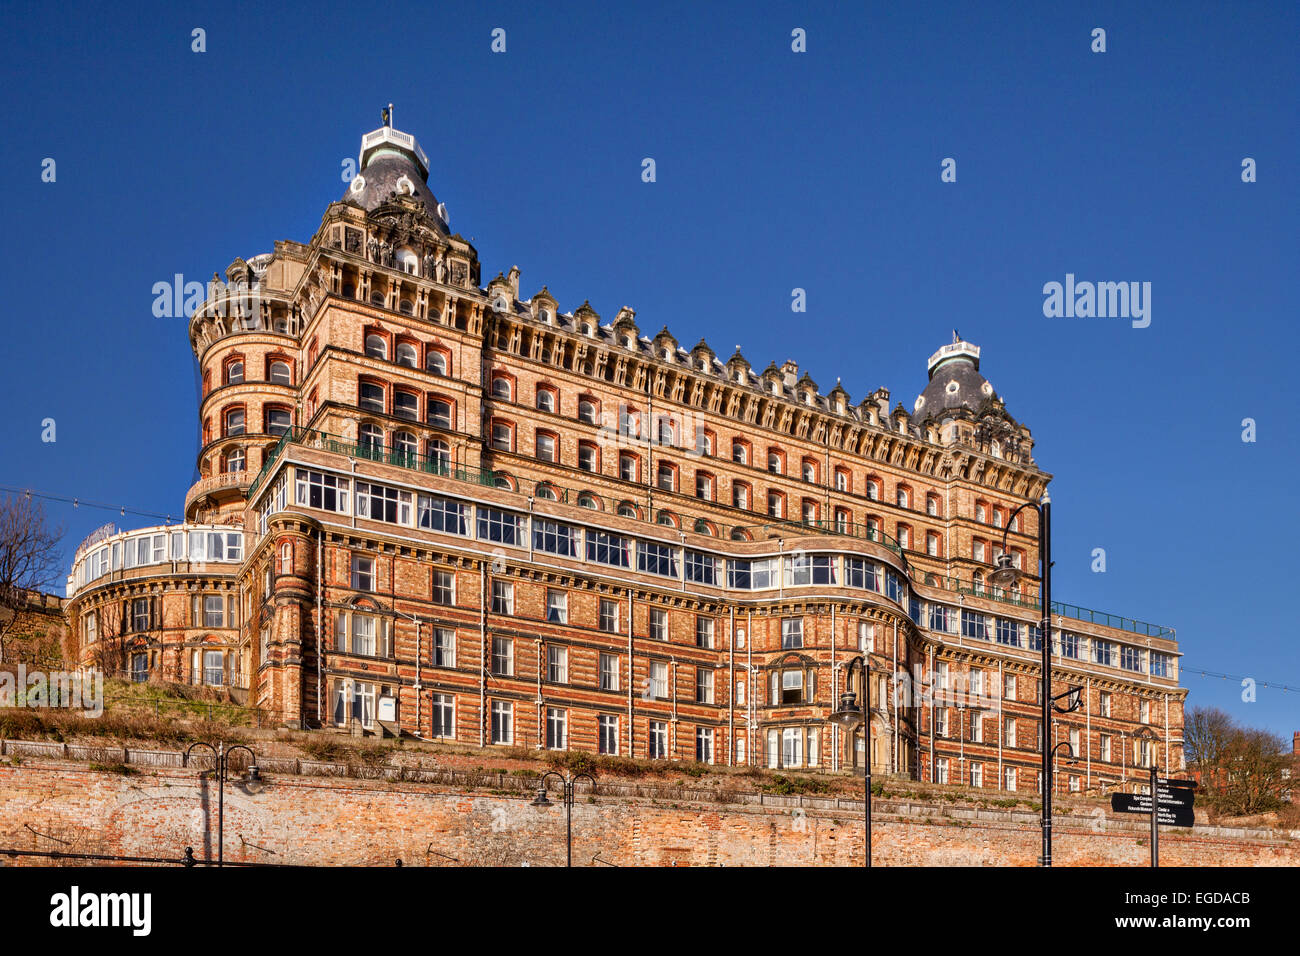 The Grand Hotel in Scarborough, North Yorkshire, on a sunny winter day. Completed in 1867, the hotel is a Grade II listed... Stock Photo